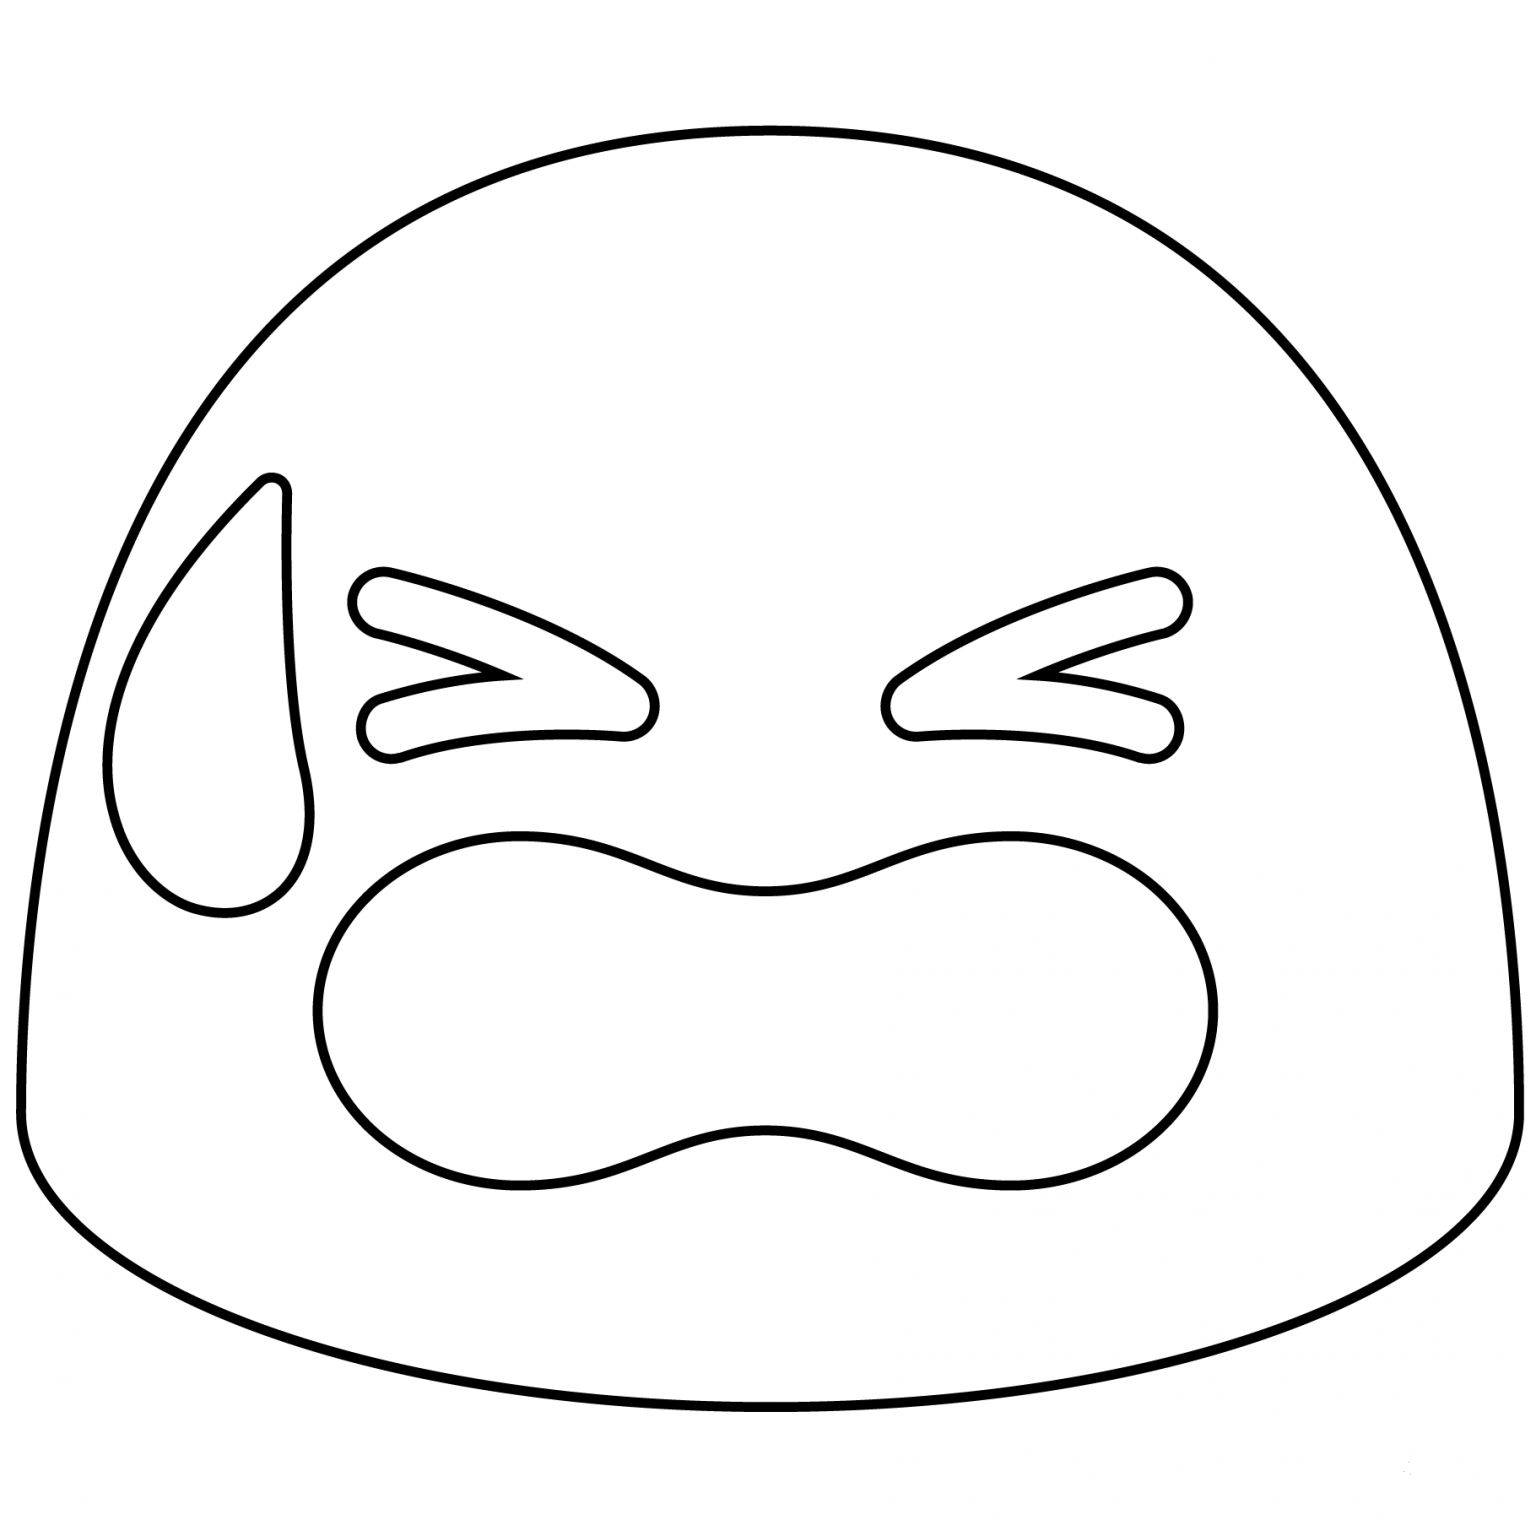 Tired Face Emoji coloring page - ColouringPages